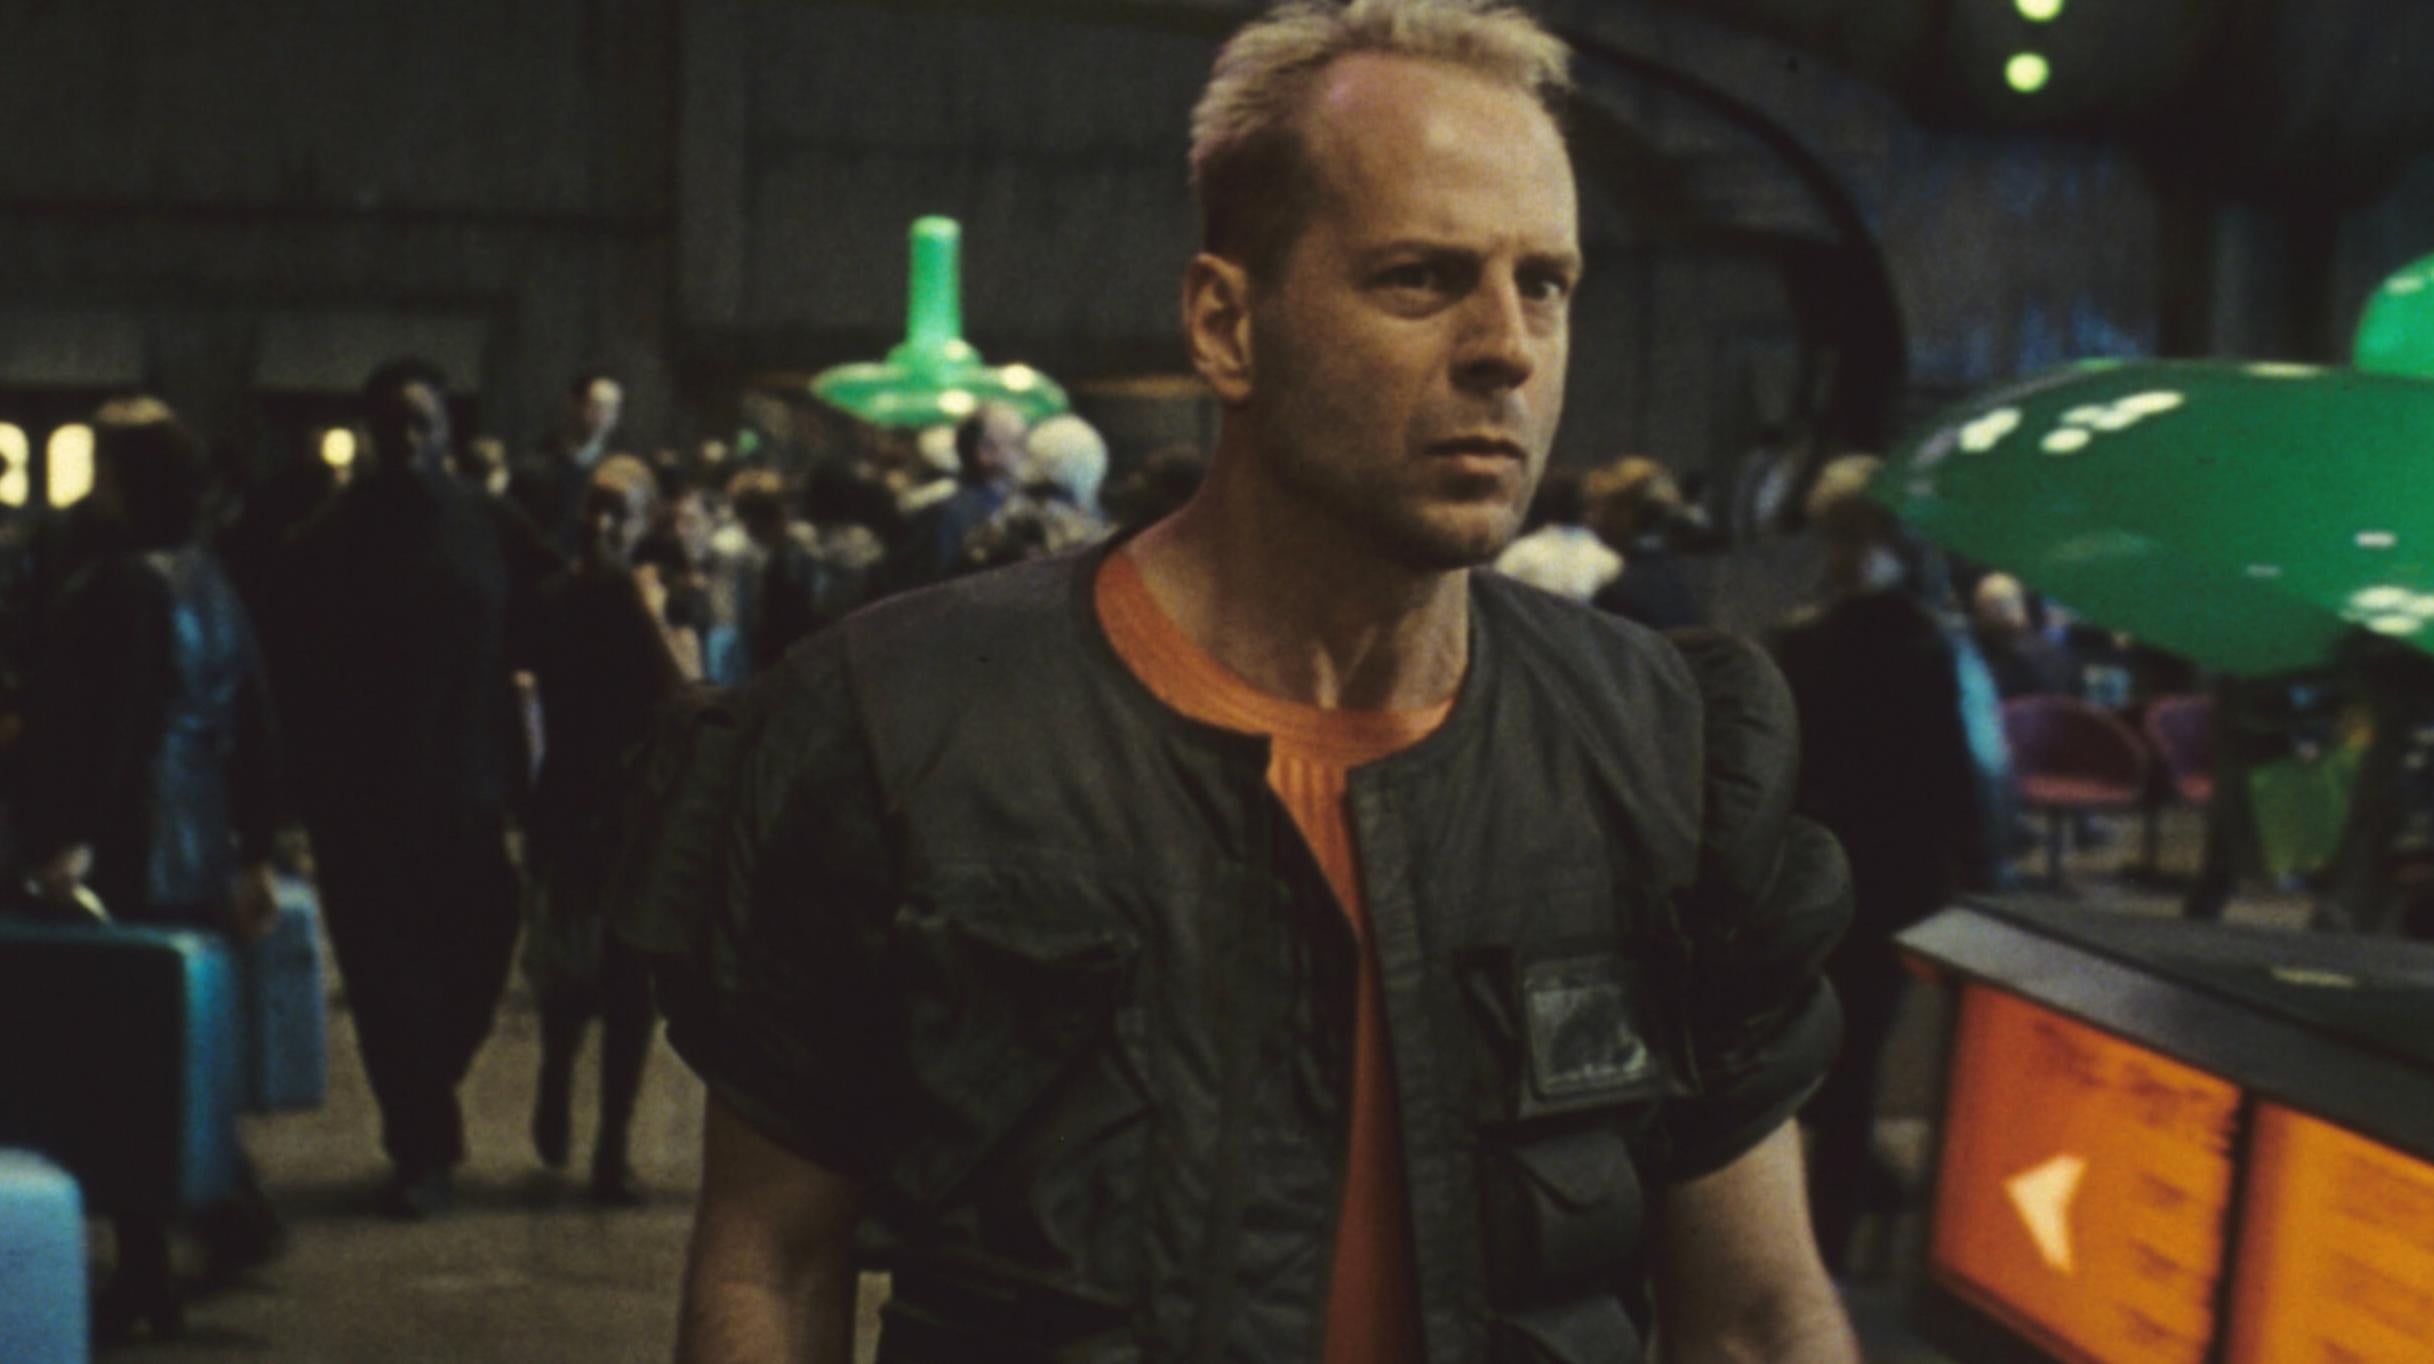 Bruce Willis as Korben Dallas in The Fifth Element. (Image: Sony Pictures)